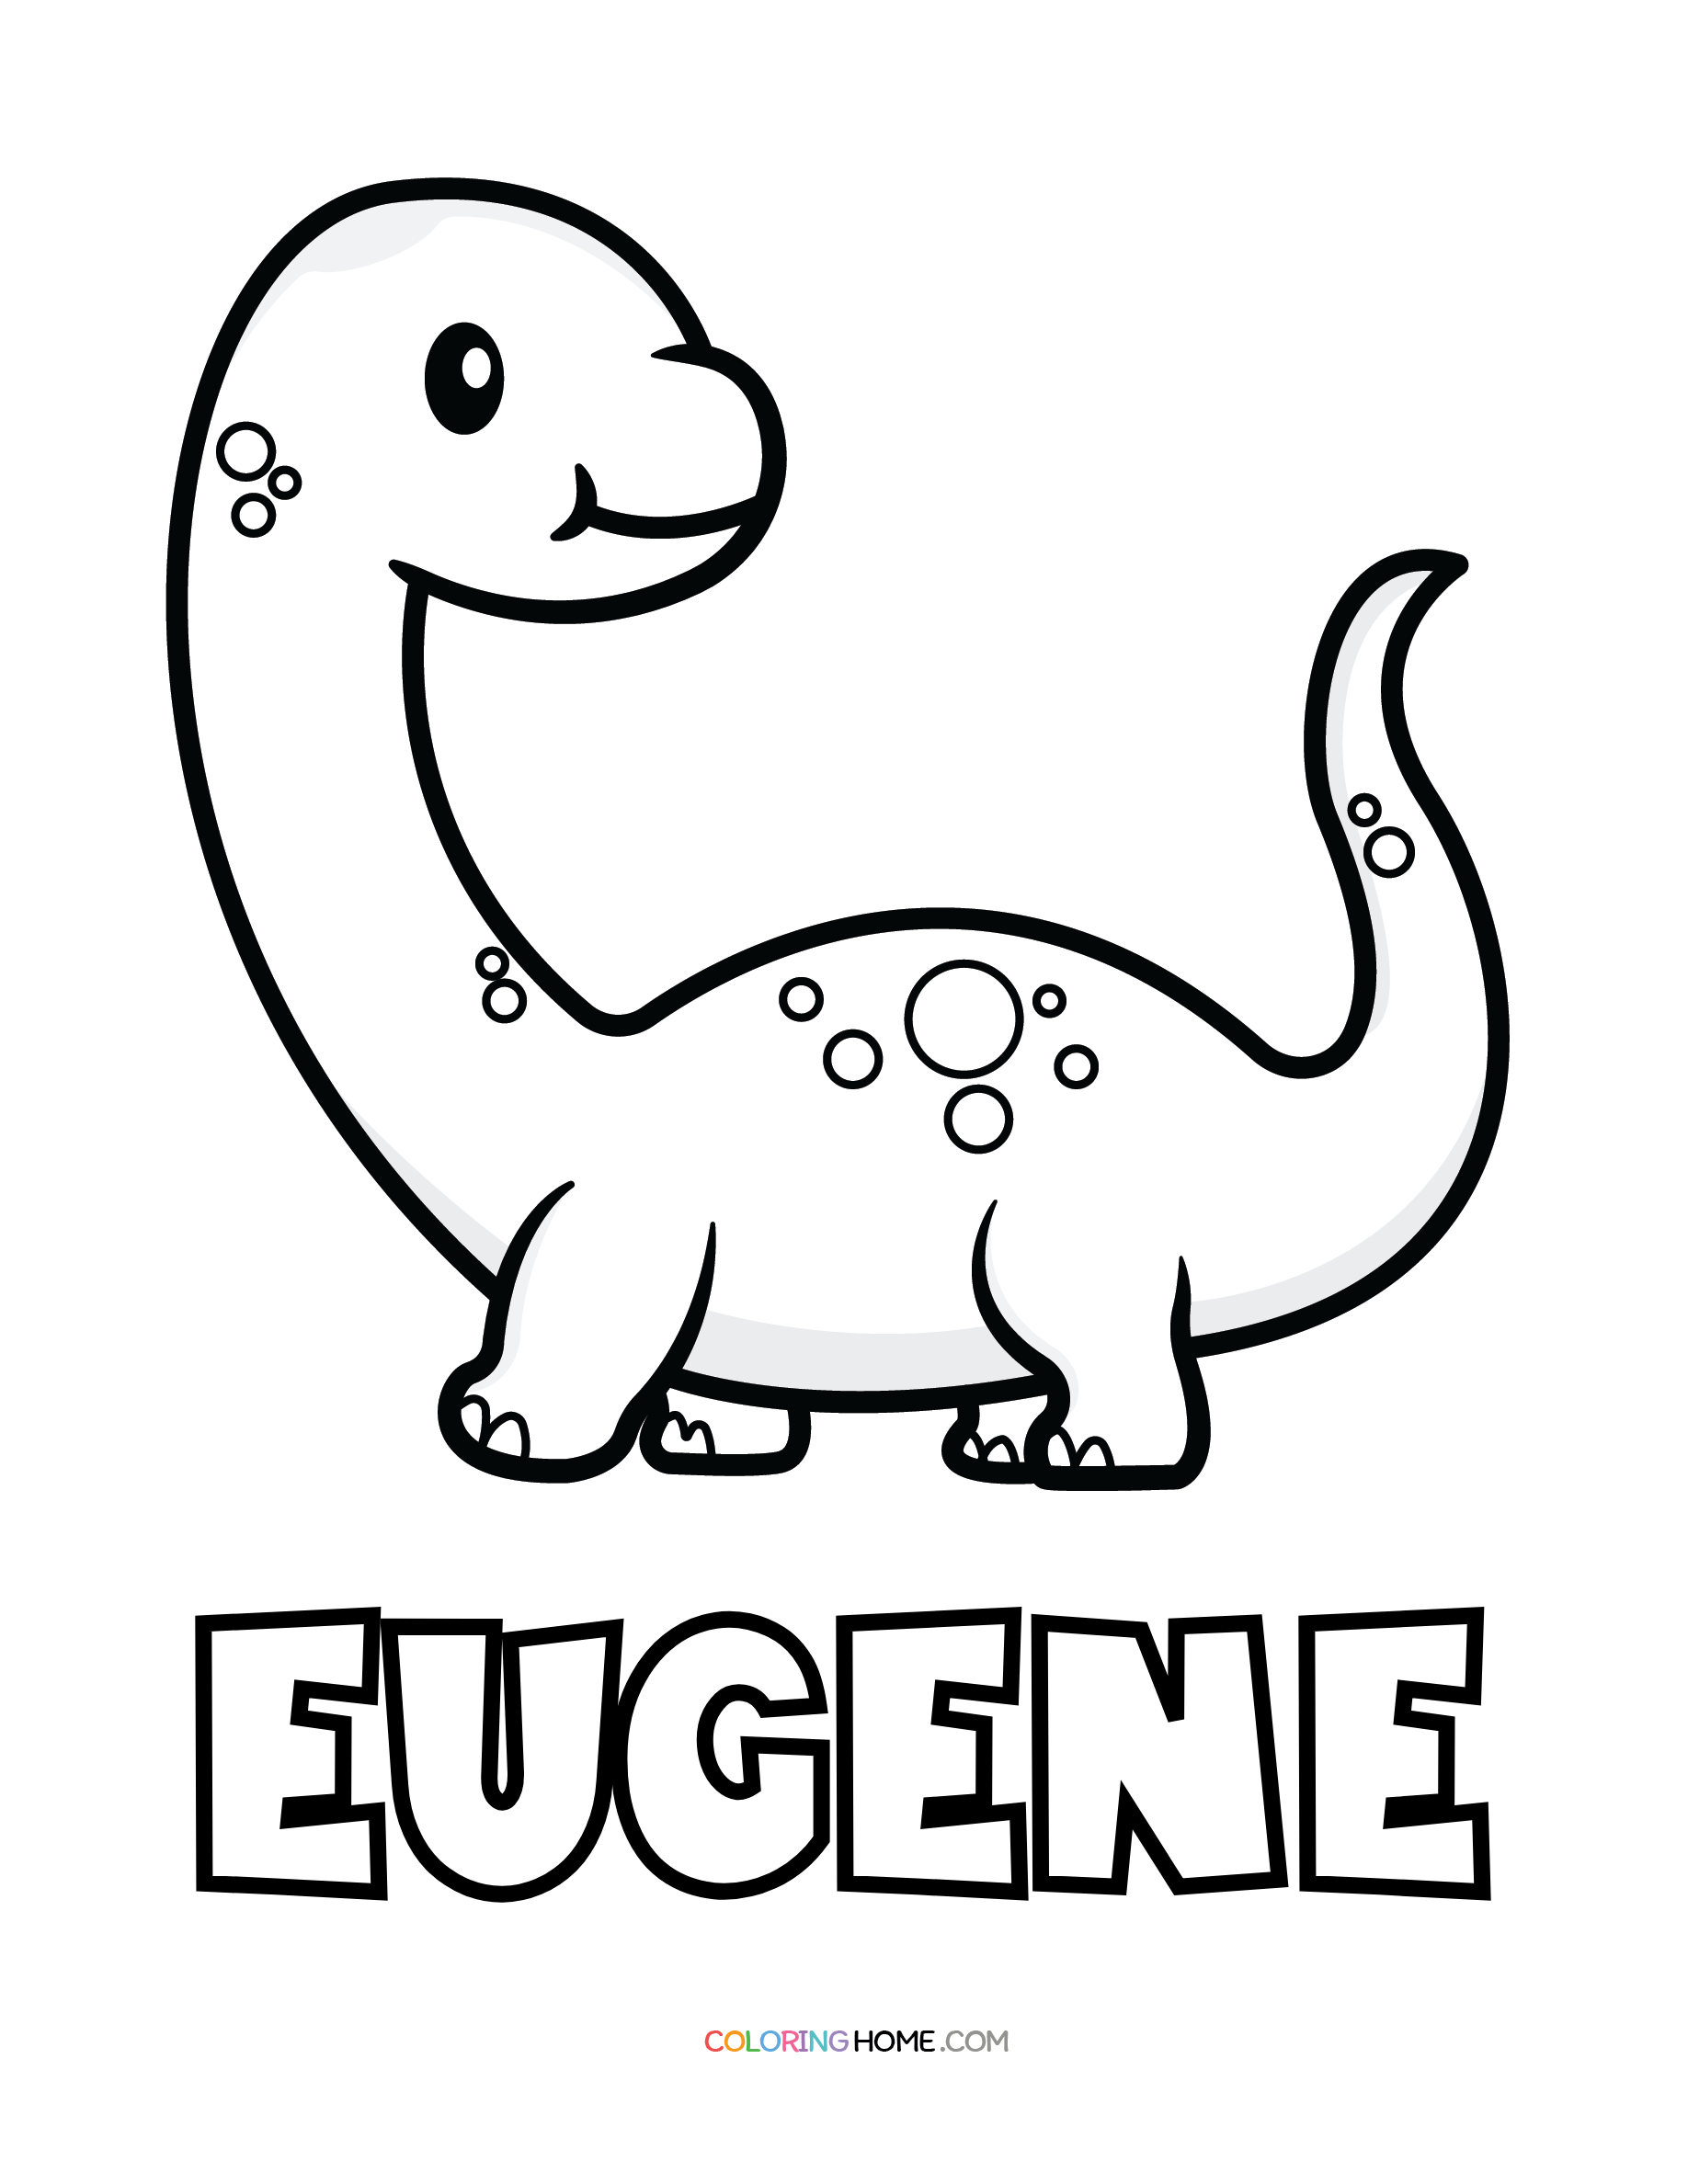 Eugene dinosaur coloring page